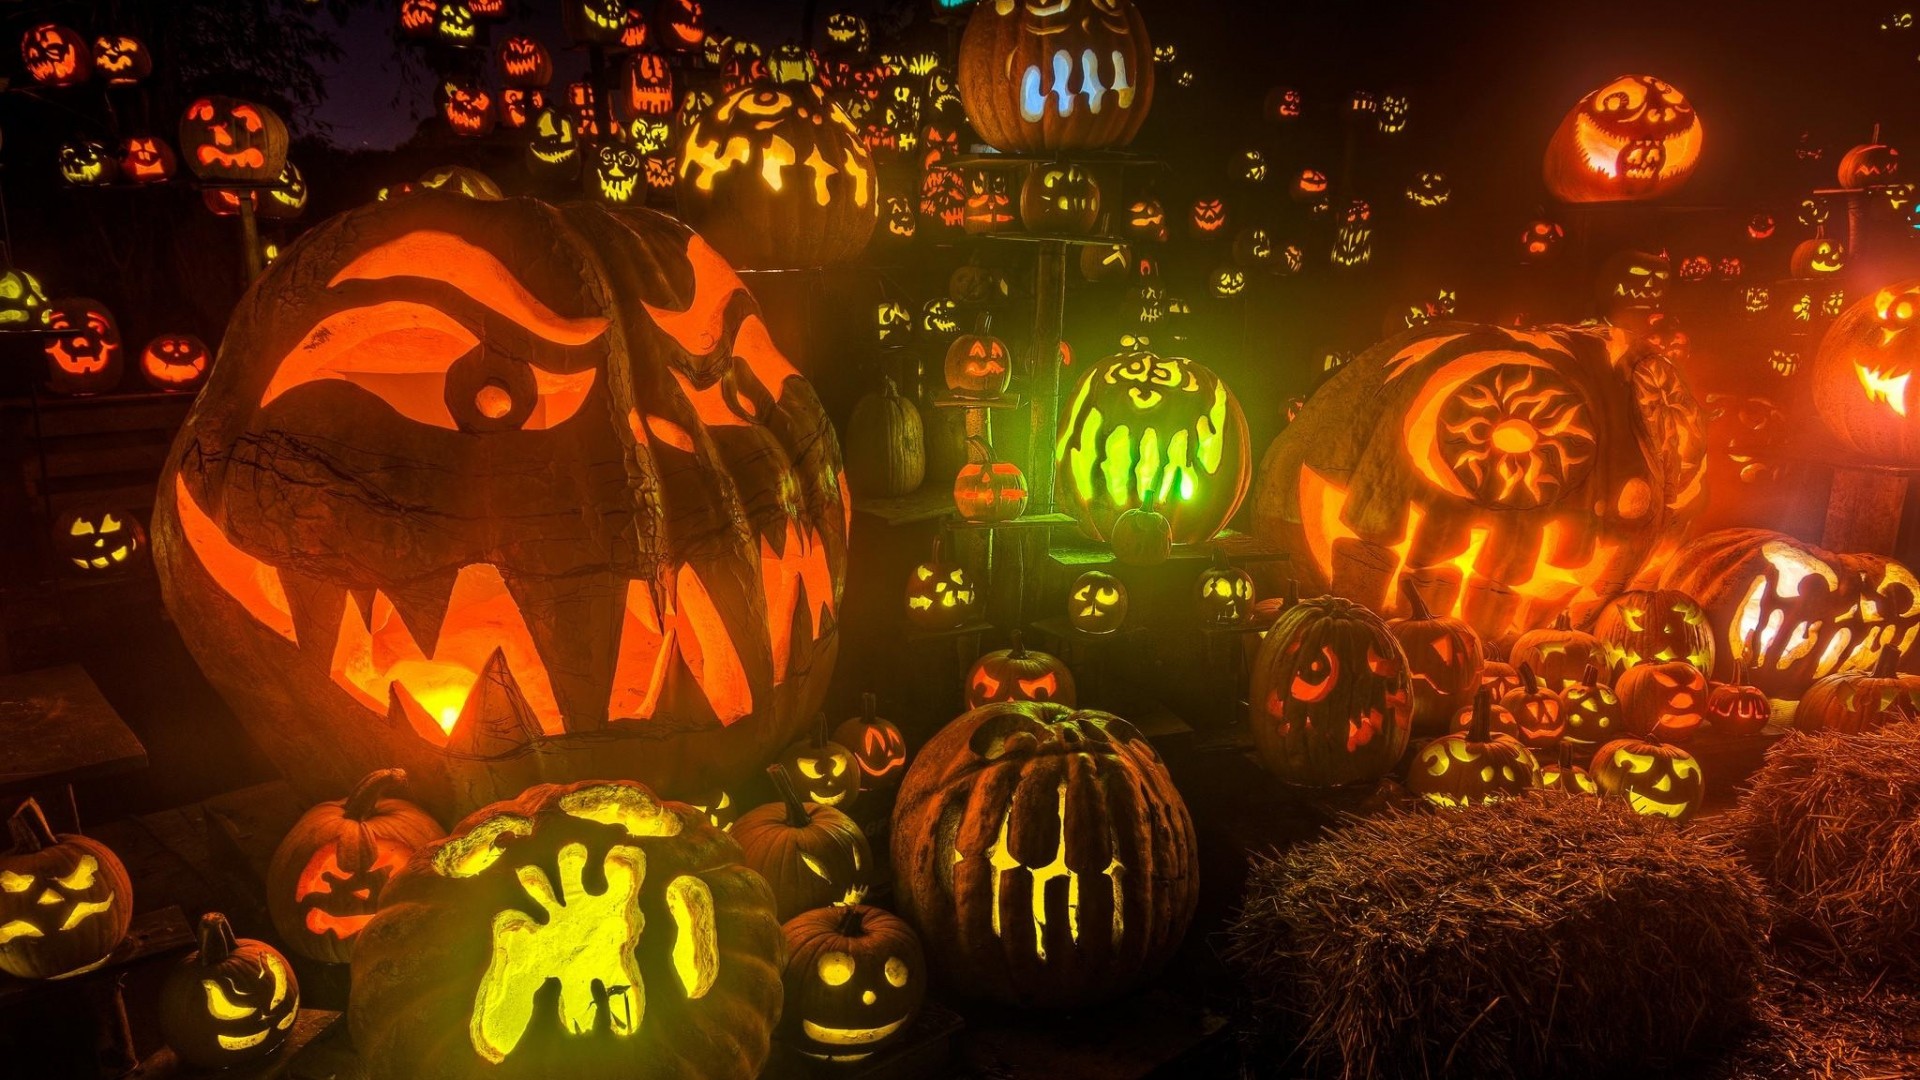 Halloween Hd Wallpapers 1080p posted by Sarah Peltier